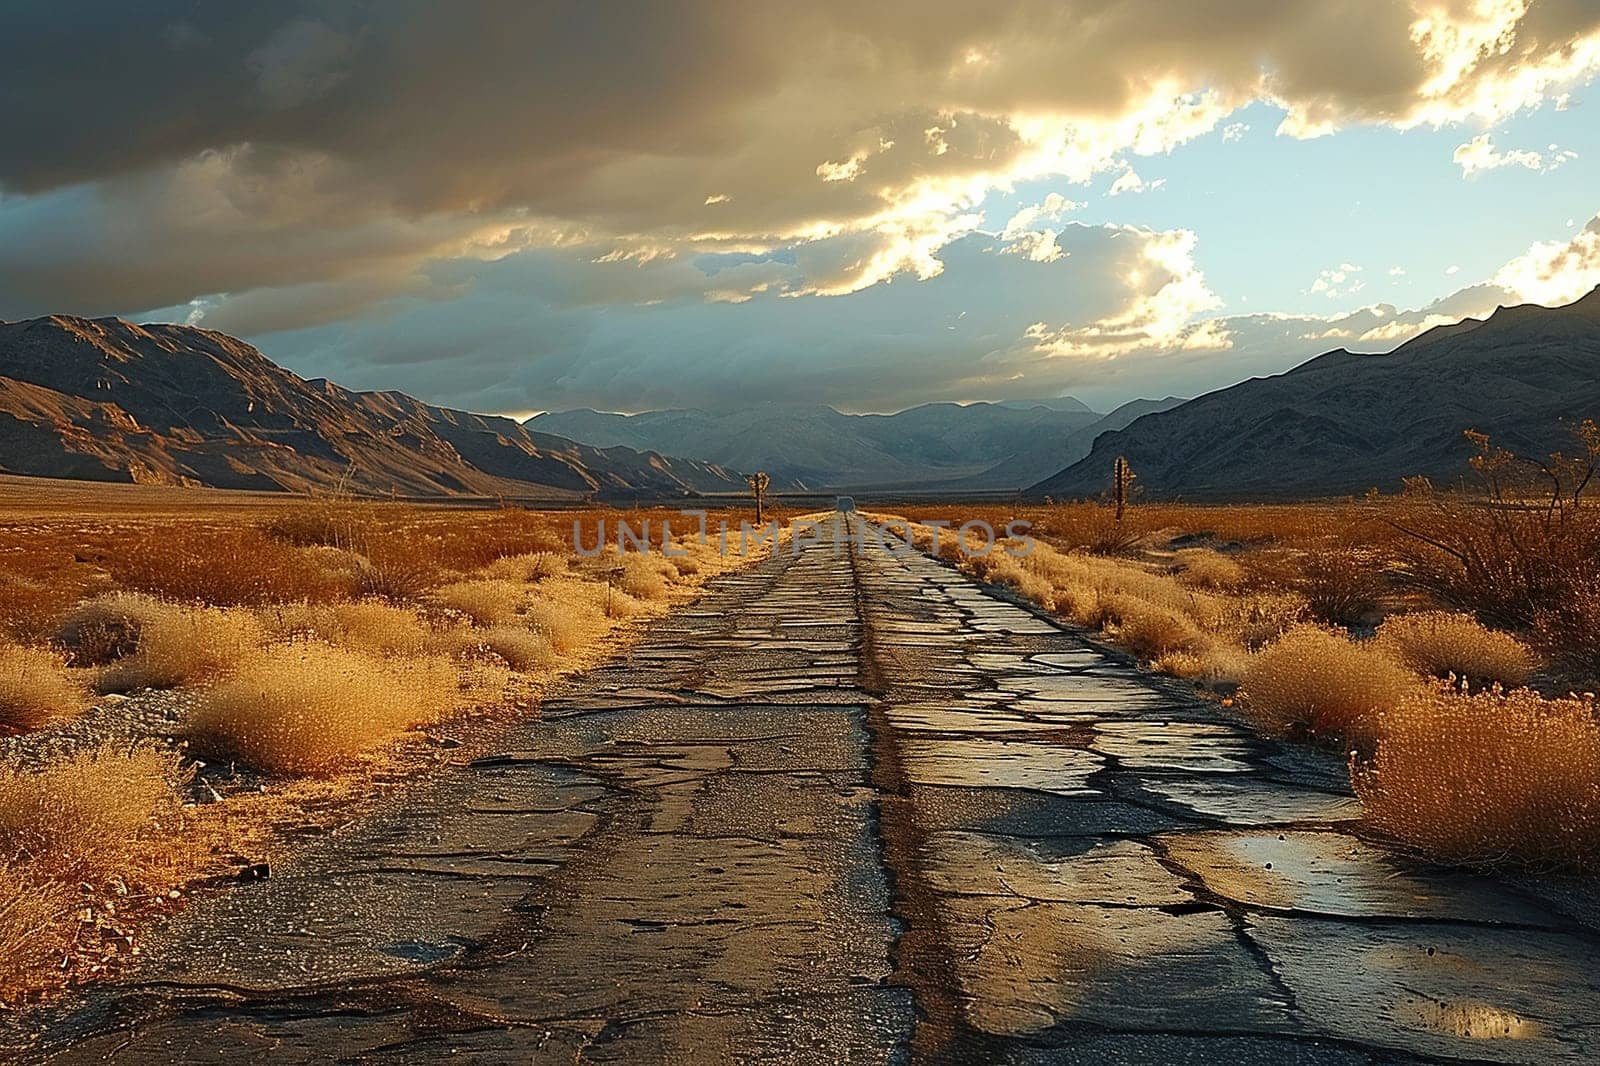 An old asphalt road in the middle of the desert in the light of the sun.